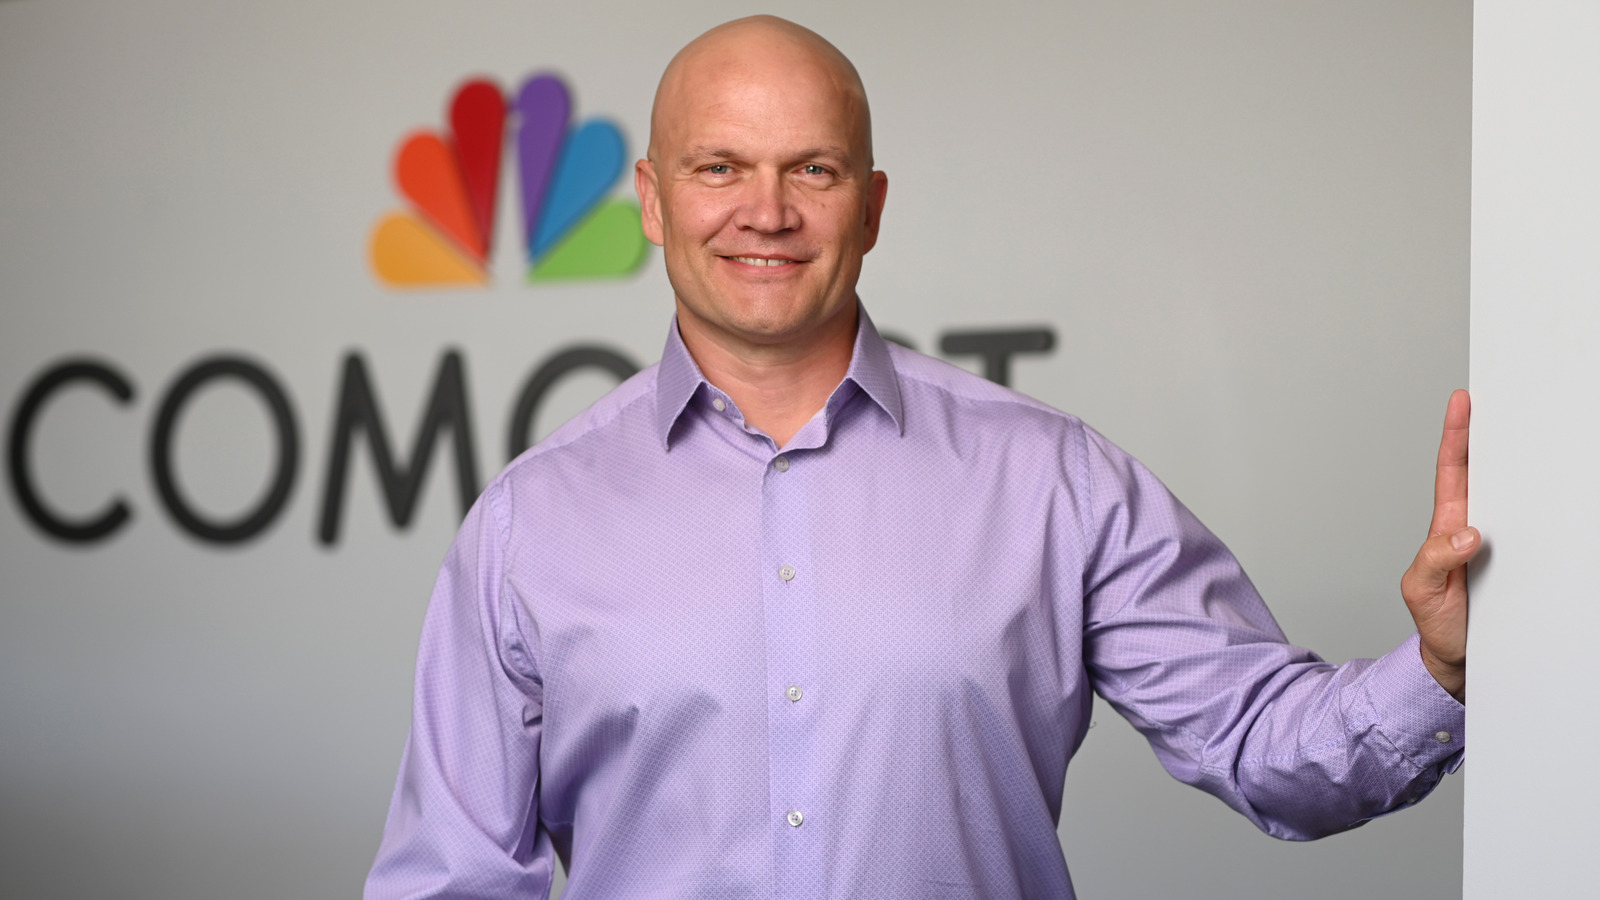 Comcast Celebrates Veterans' Day with Trent Clausen — Comcast California RVP of Engineering & Former Army Veteran